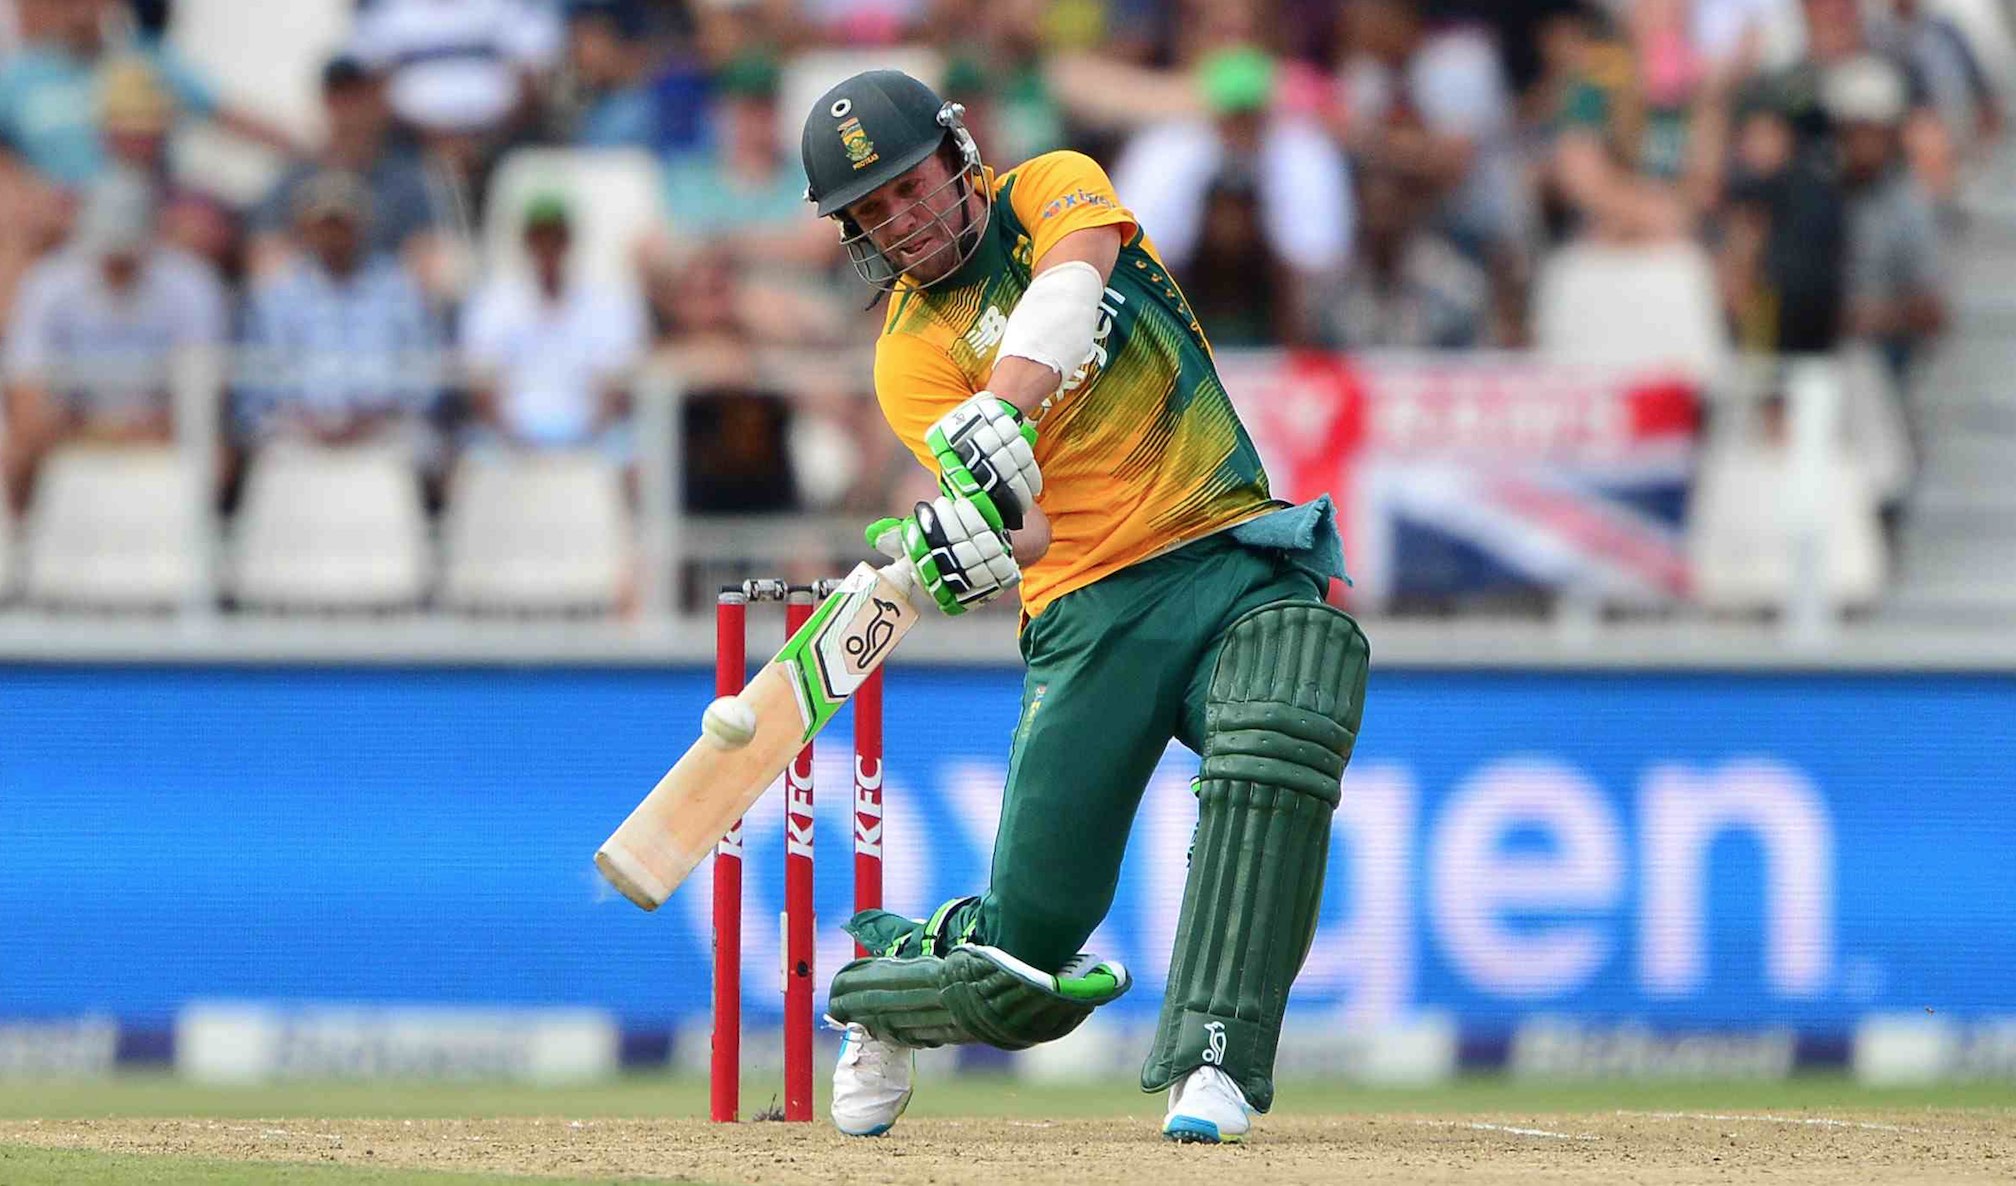 AB de Villiers' impact can't be measured by runs